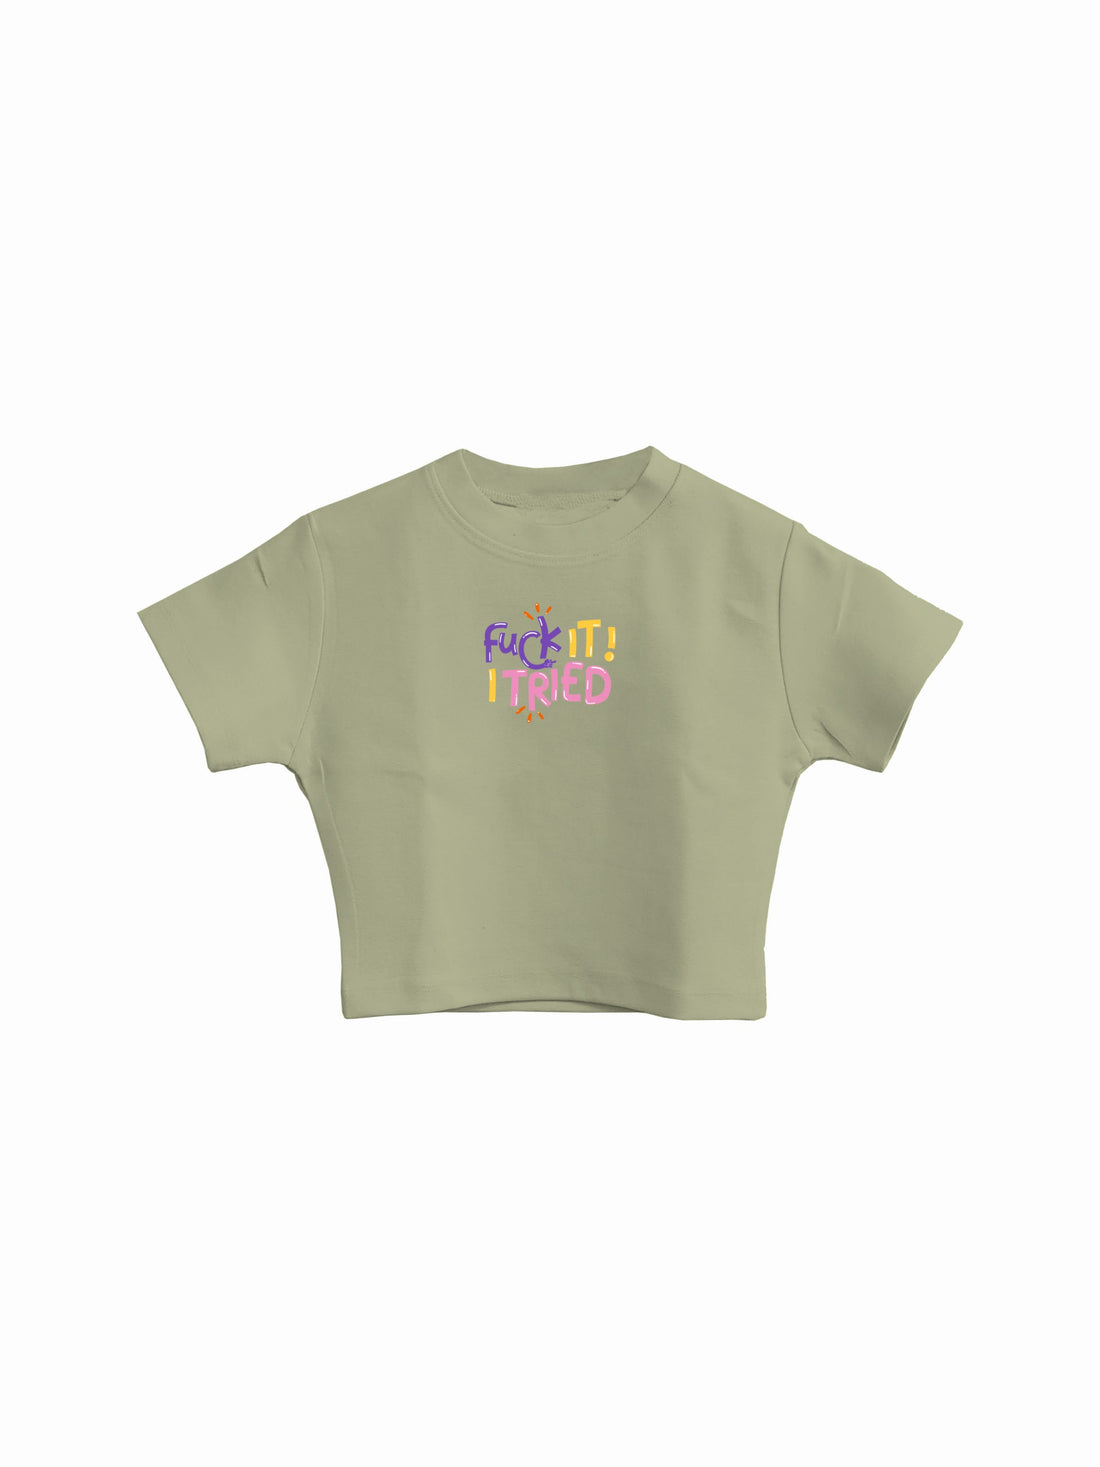 Fuck It I Tried : Burger Bae Round Neck Crop Baby Tee For Women